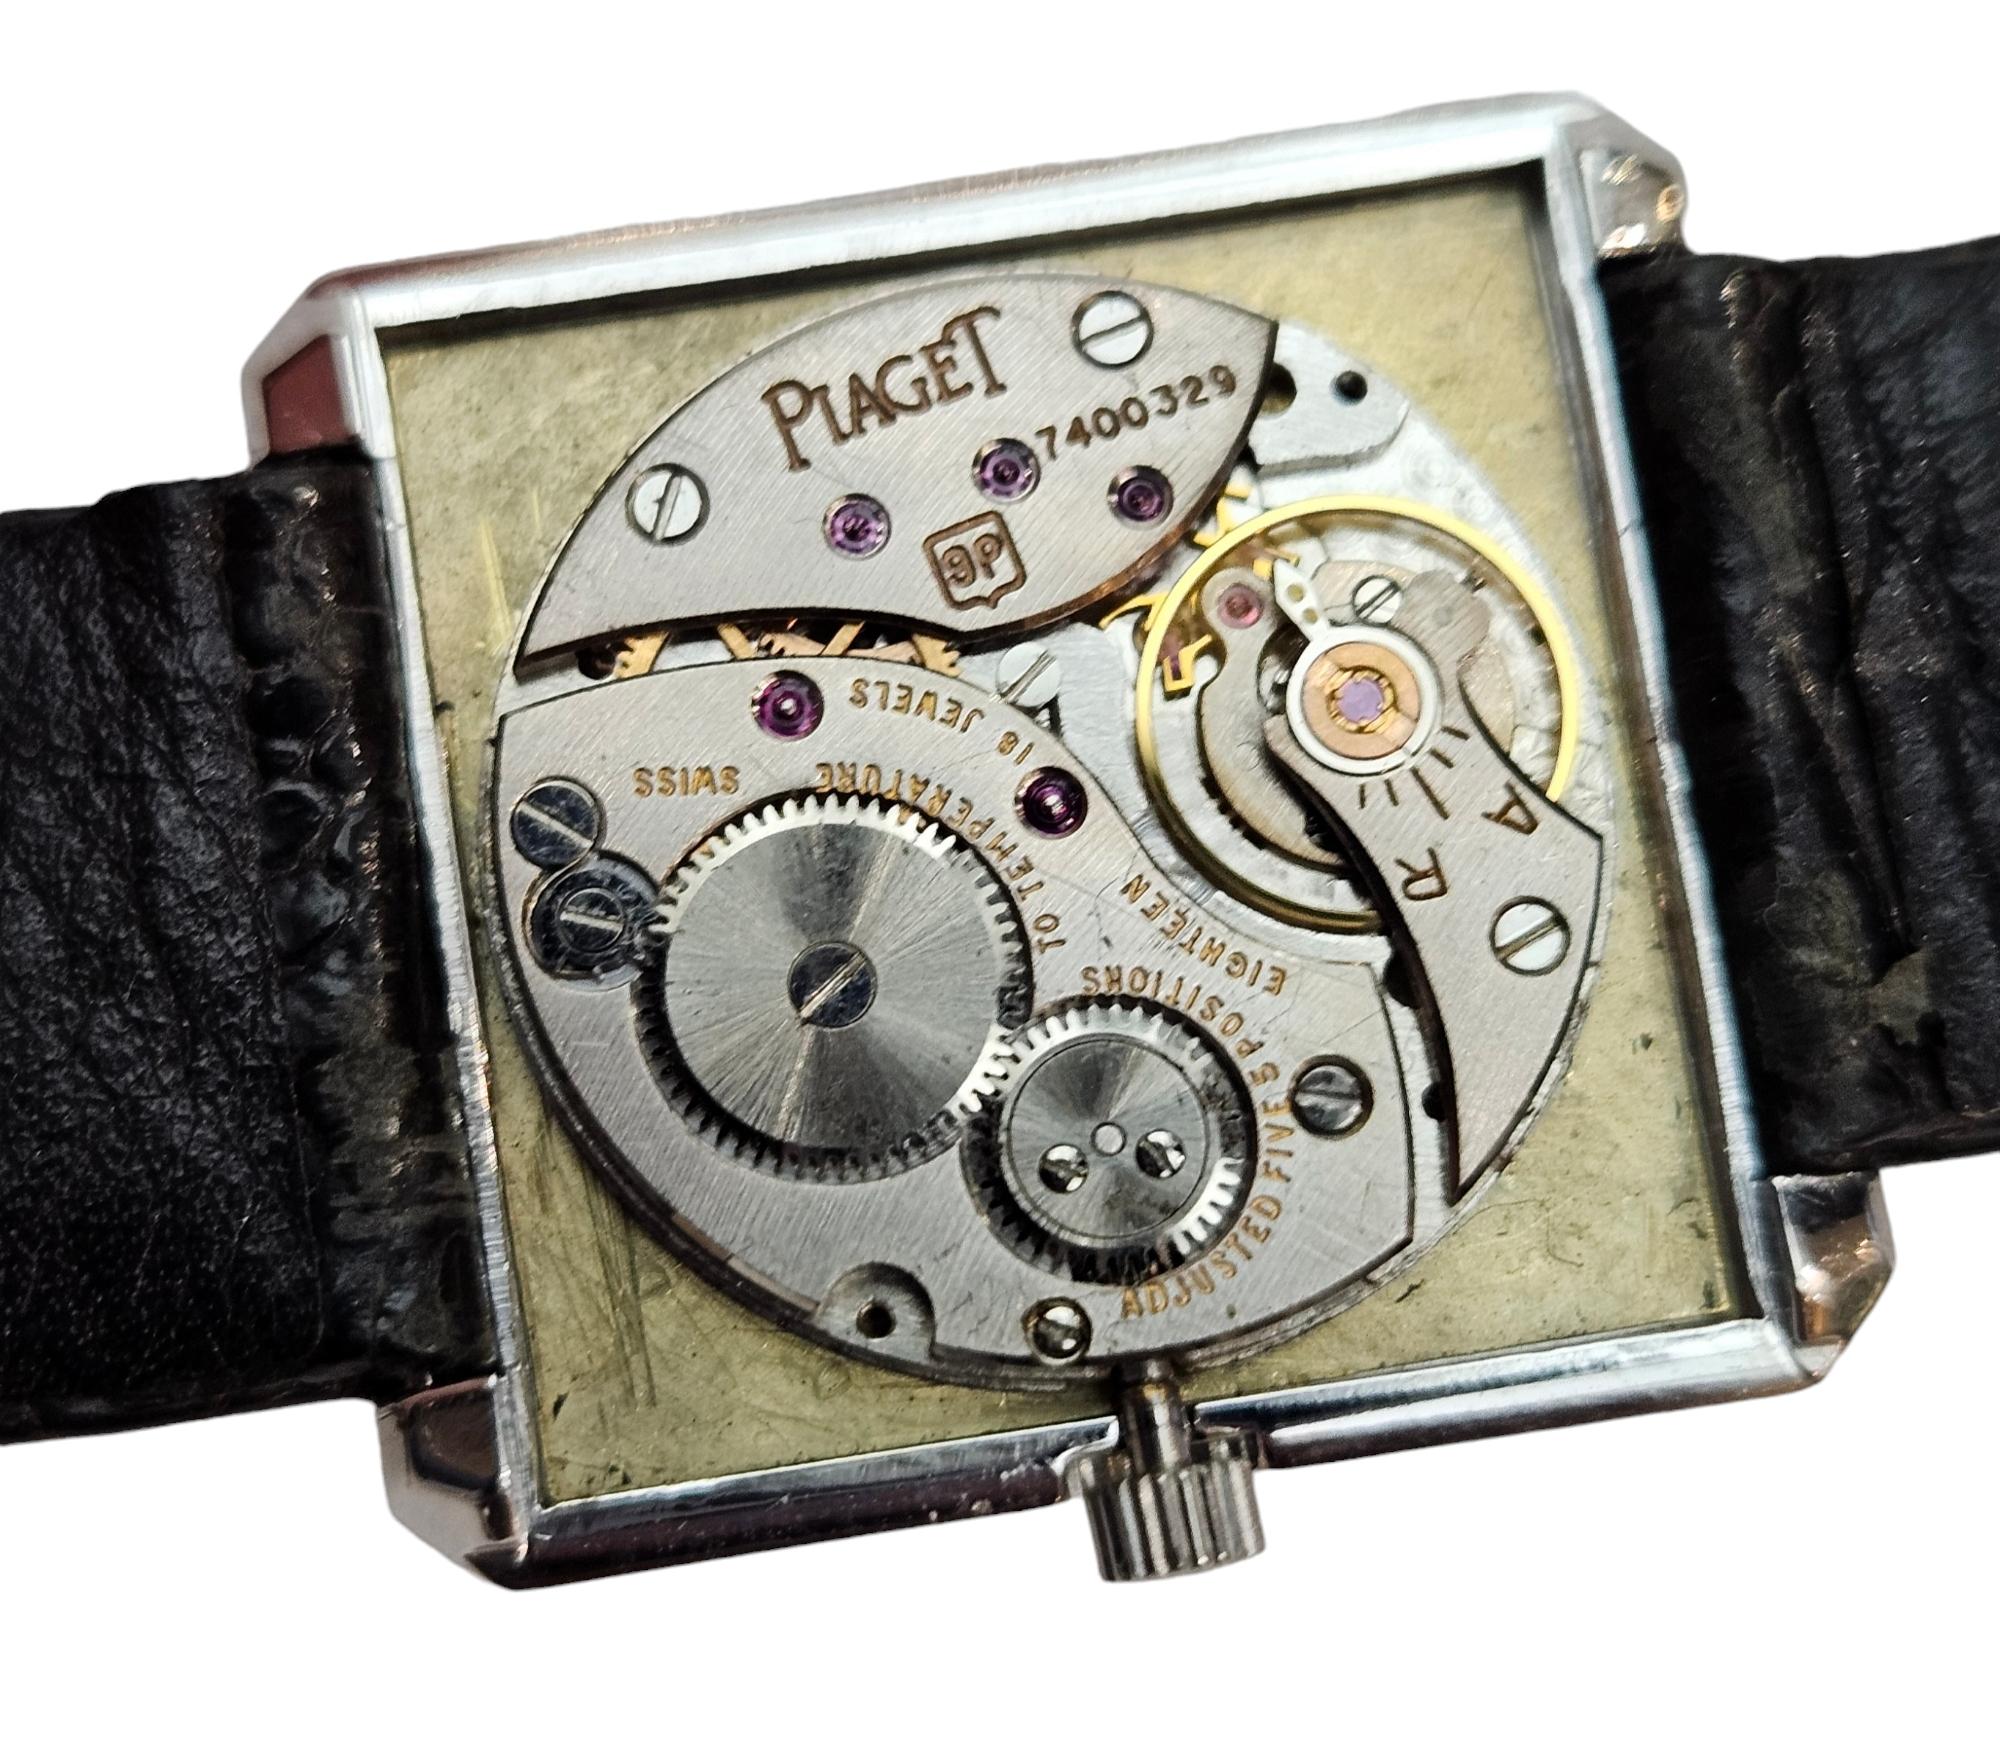 18 Kt White Gold Piaget Protocole Wrist Watch, Manual Winding For Sale 5